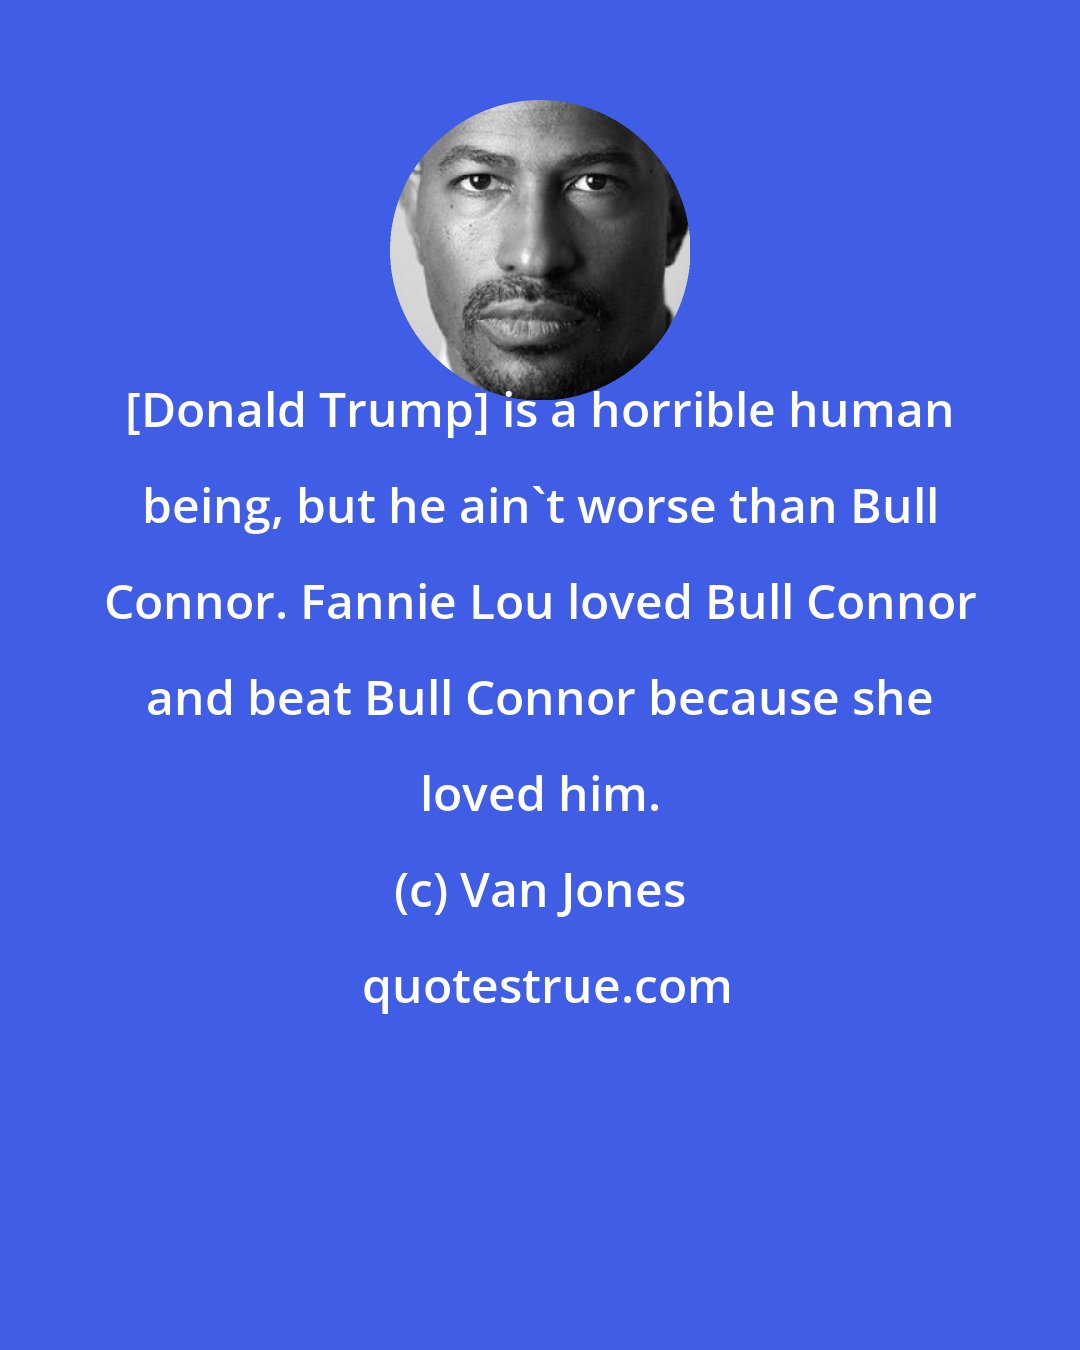 Van Jones: [Donald Trump] is a horrible human being, but he ain't worse than Bull Connor. Fannie Lou loved Bull Connor and beat Bull Connor because she loved him.